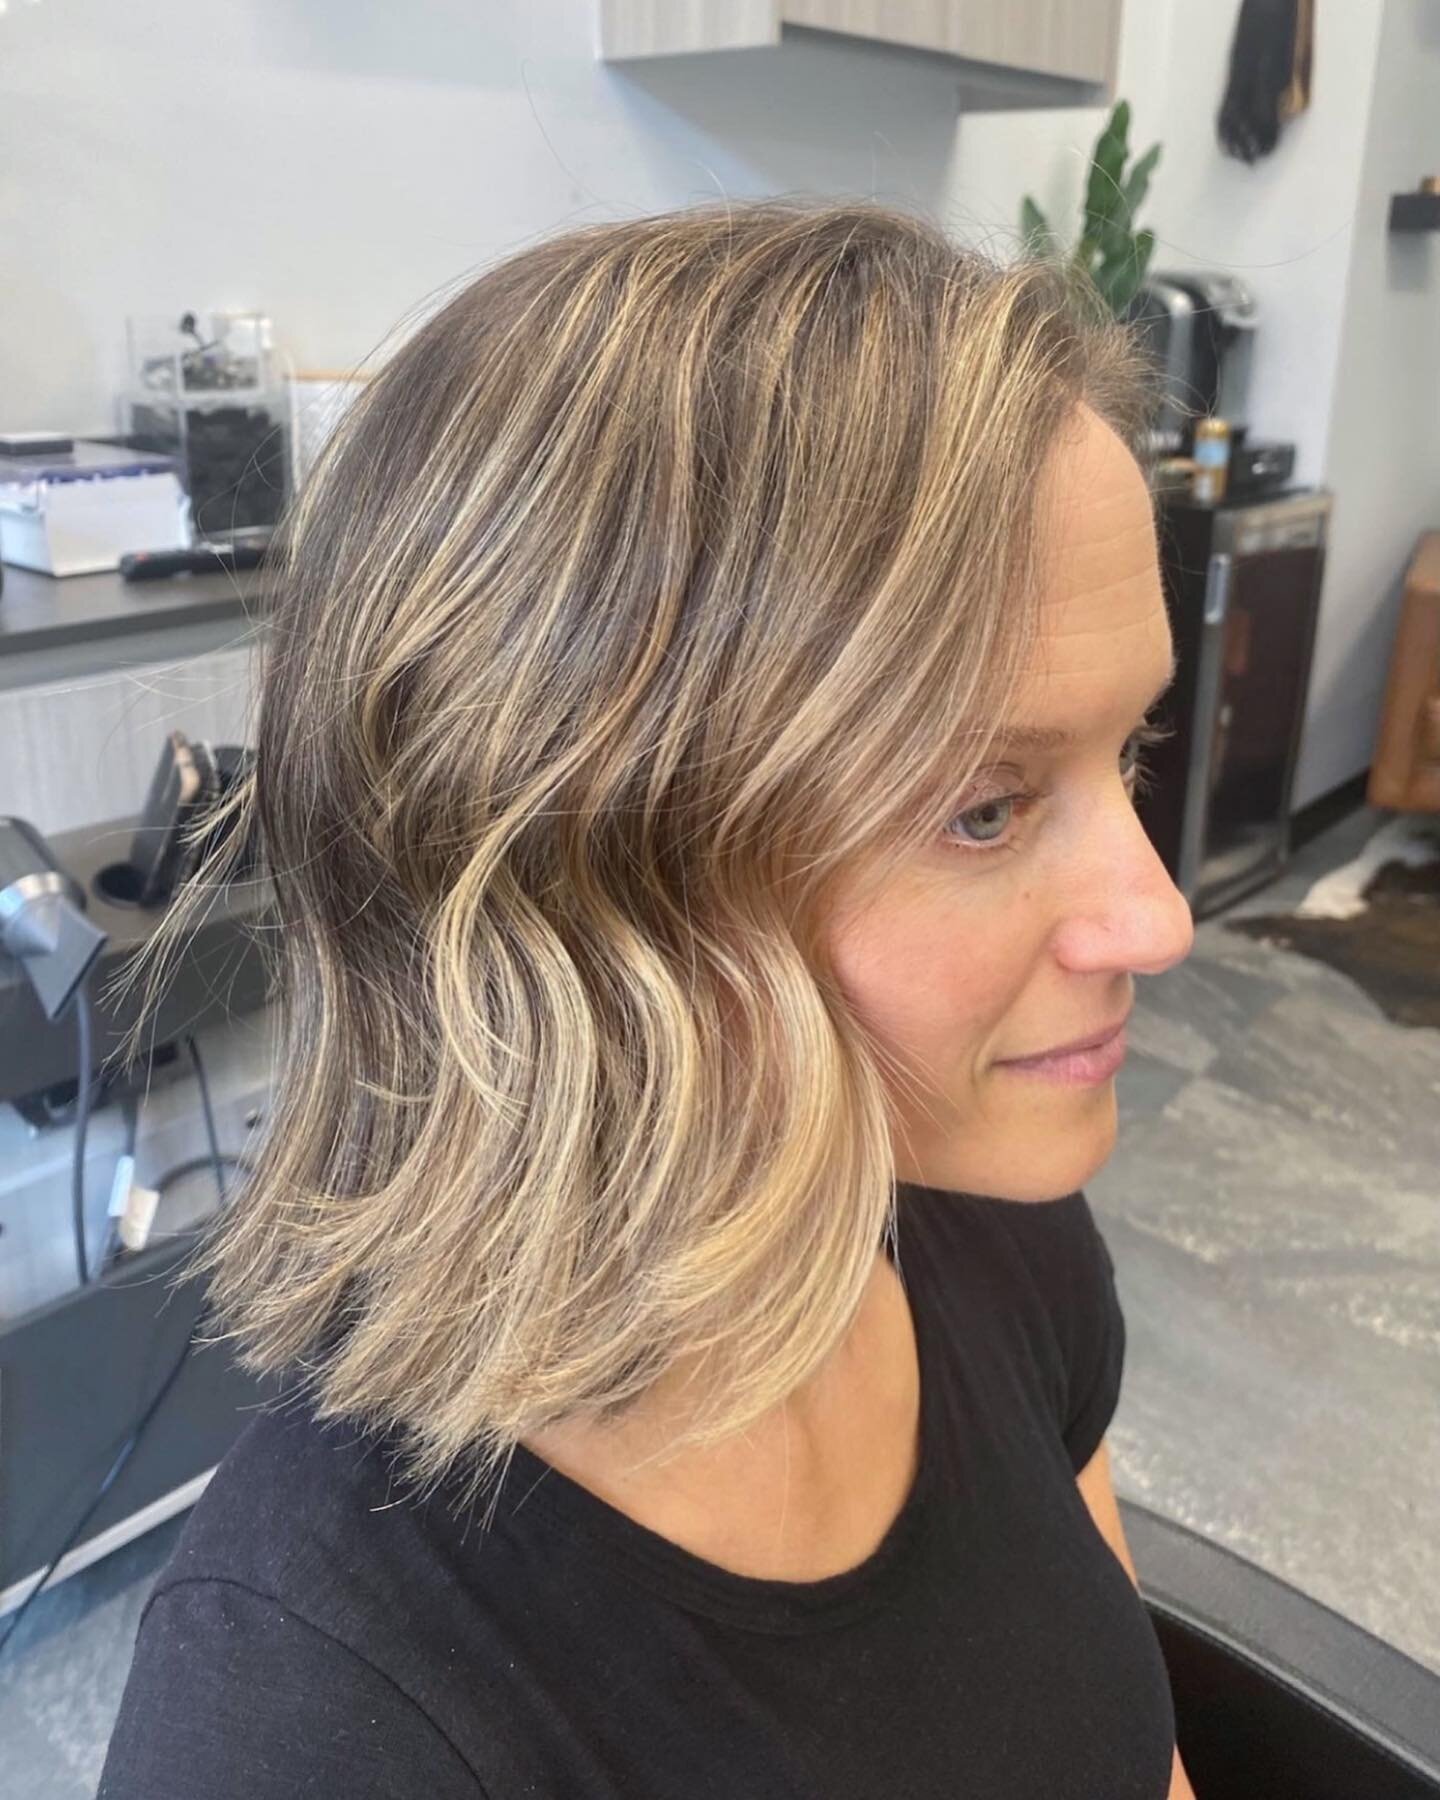 BIG transformation! Chop and Balayage. Swipe for the before. ⬅️🙌🏼
#trusttheprocess #truthsalon
.
.
.
.
.
.
.
.
.
#balayage  #highlights #livedinhair #foilage #dimensionalcolor #hairinspo #hairvideos #haircolorist #babylights #SchwarzkopfUSA #olaple